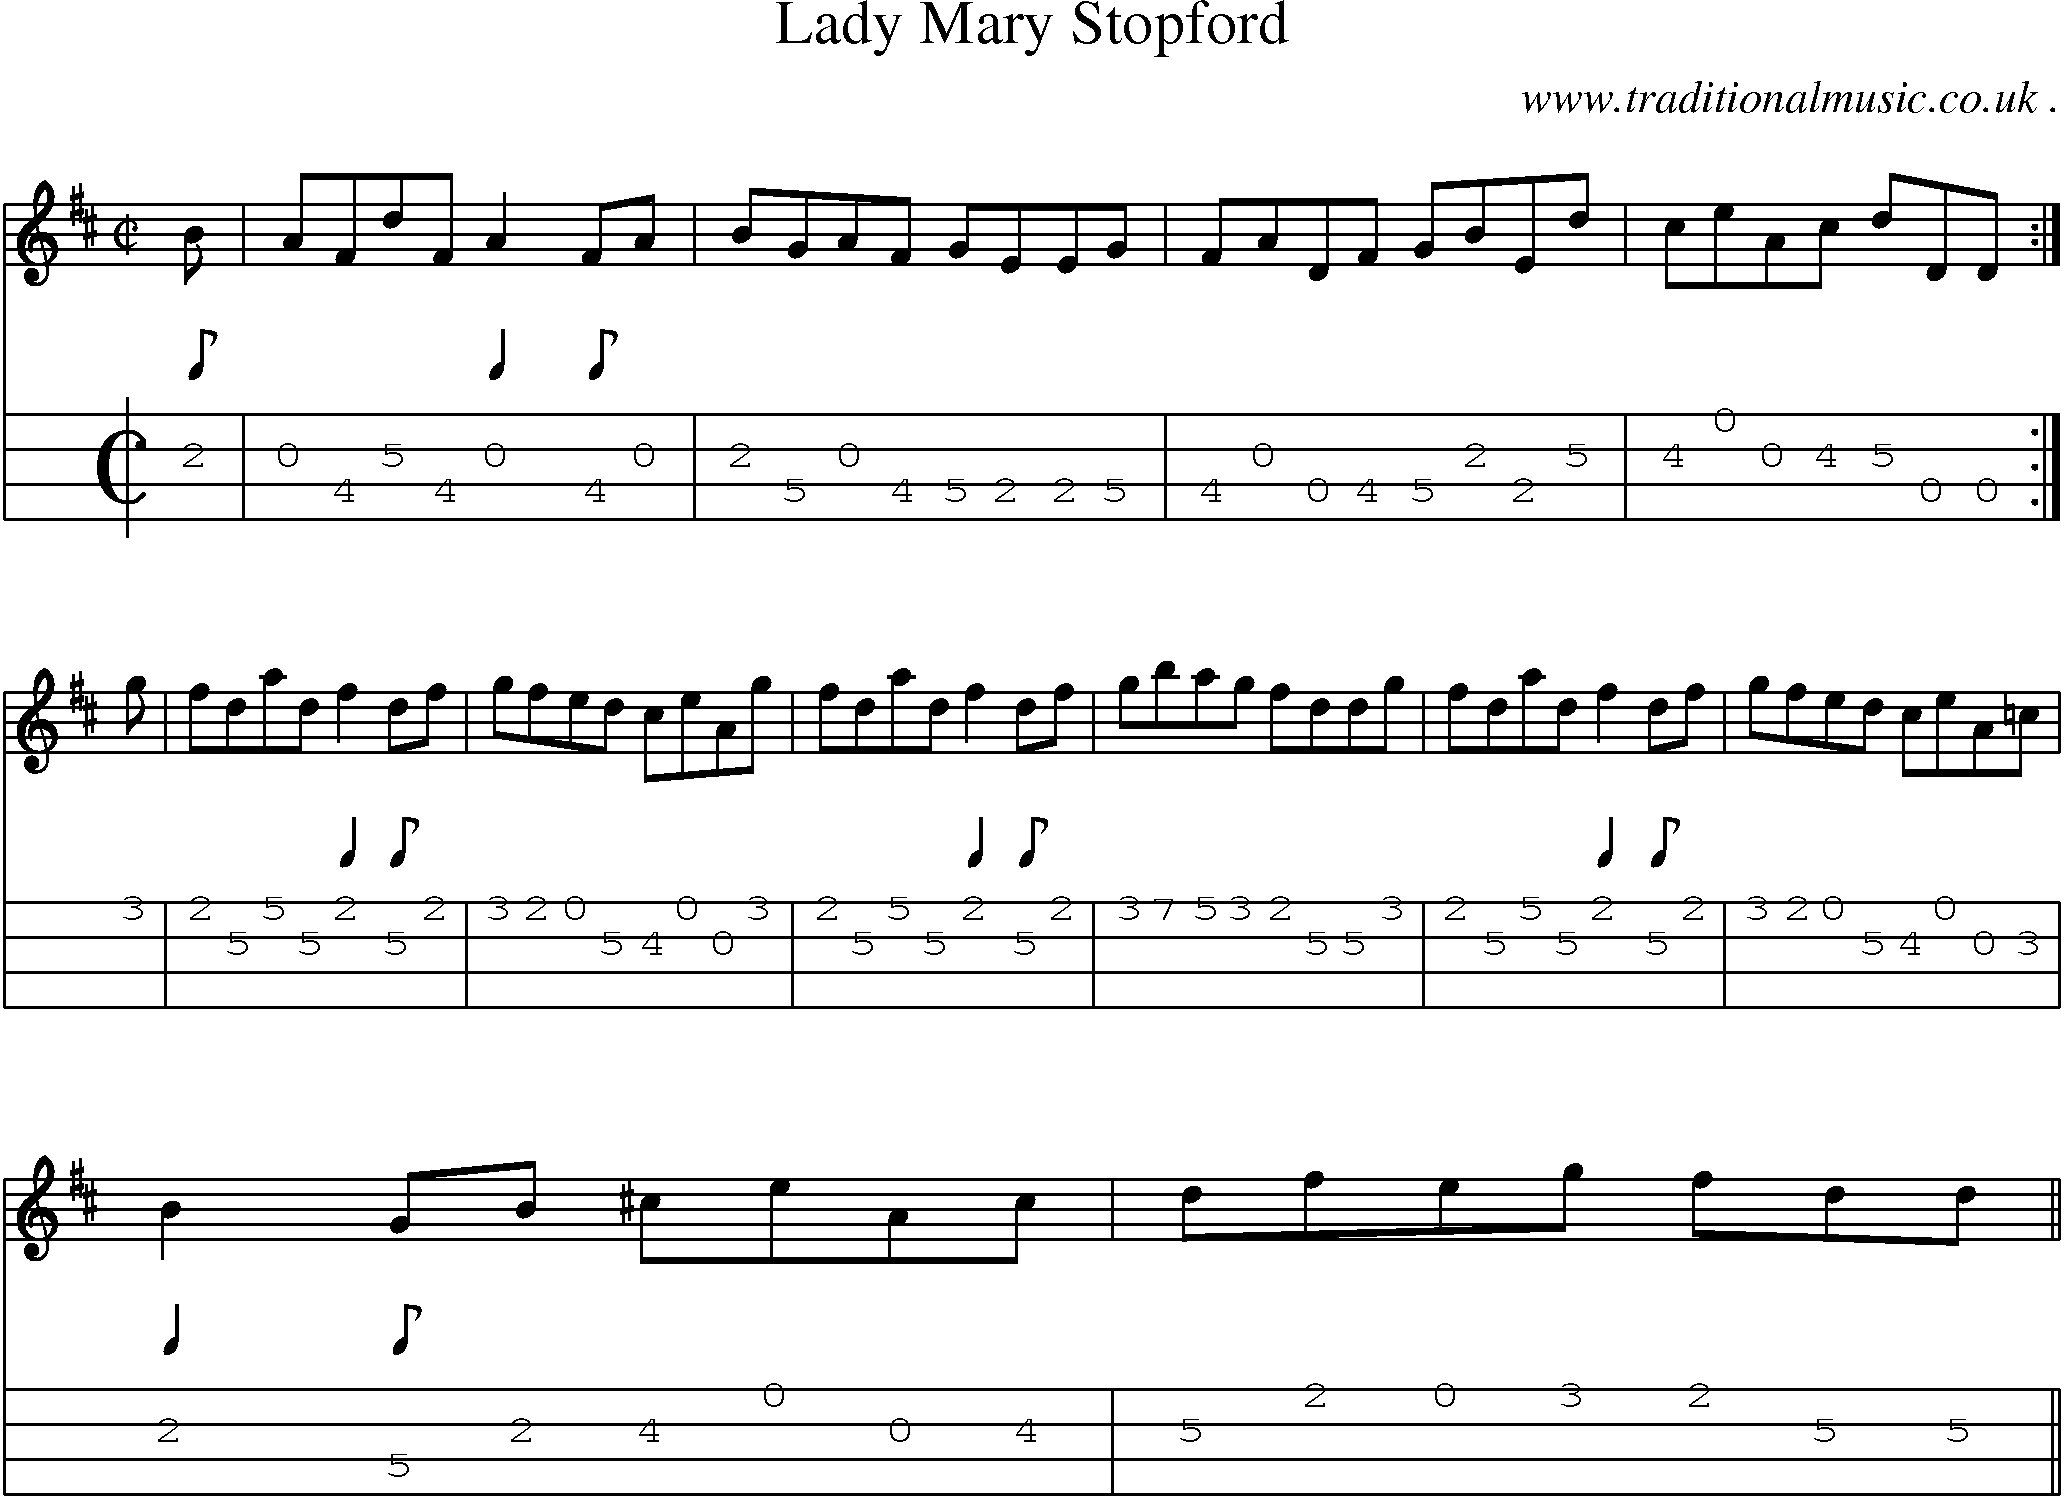 Sheet-music  score, Chords and Mandolin Tabs for Lady Mary Stopford